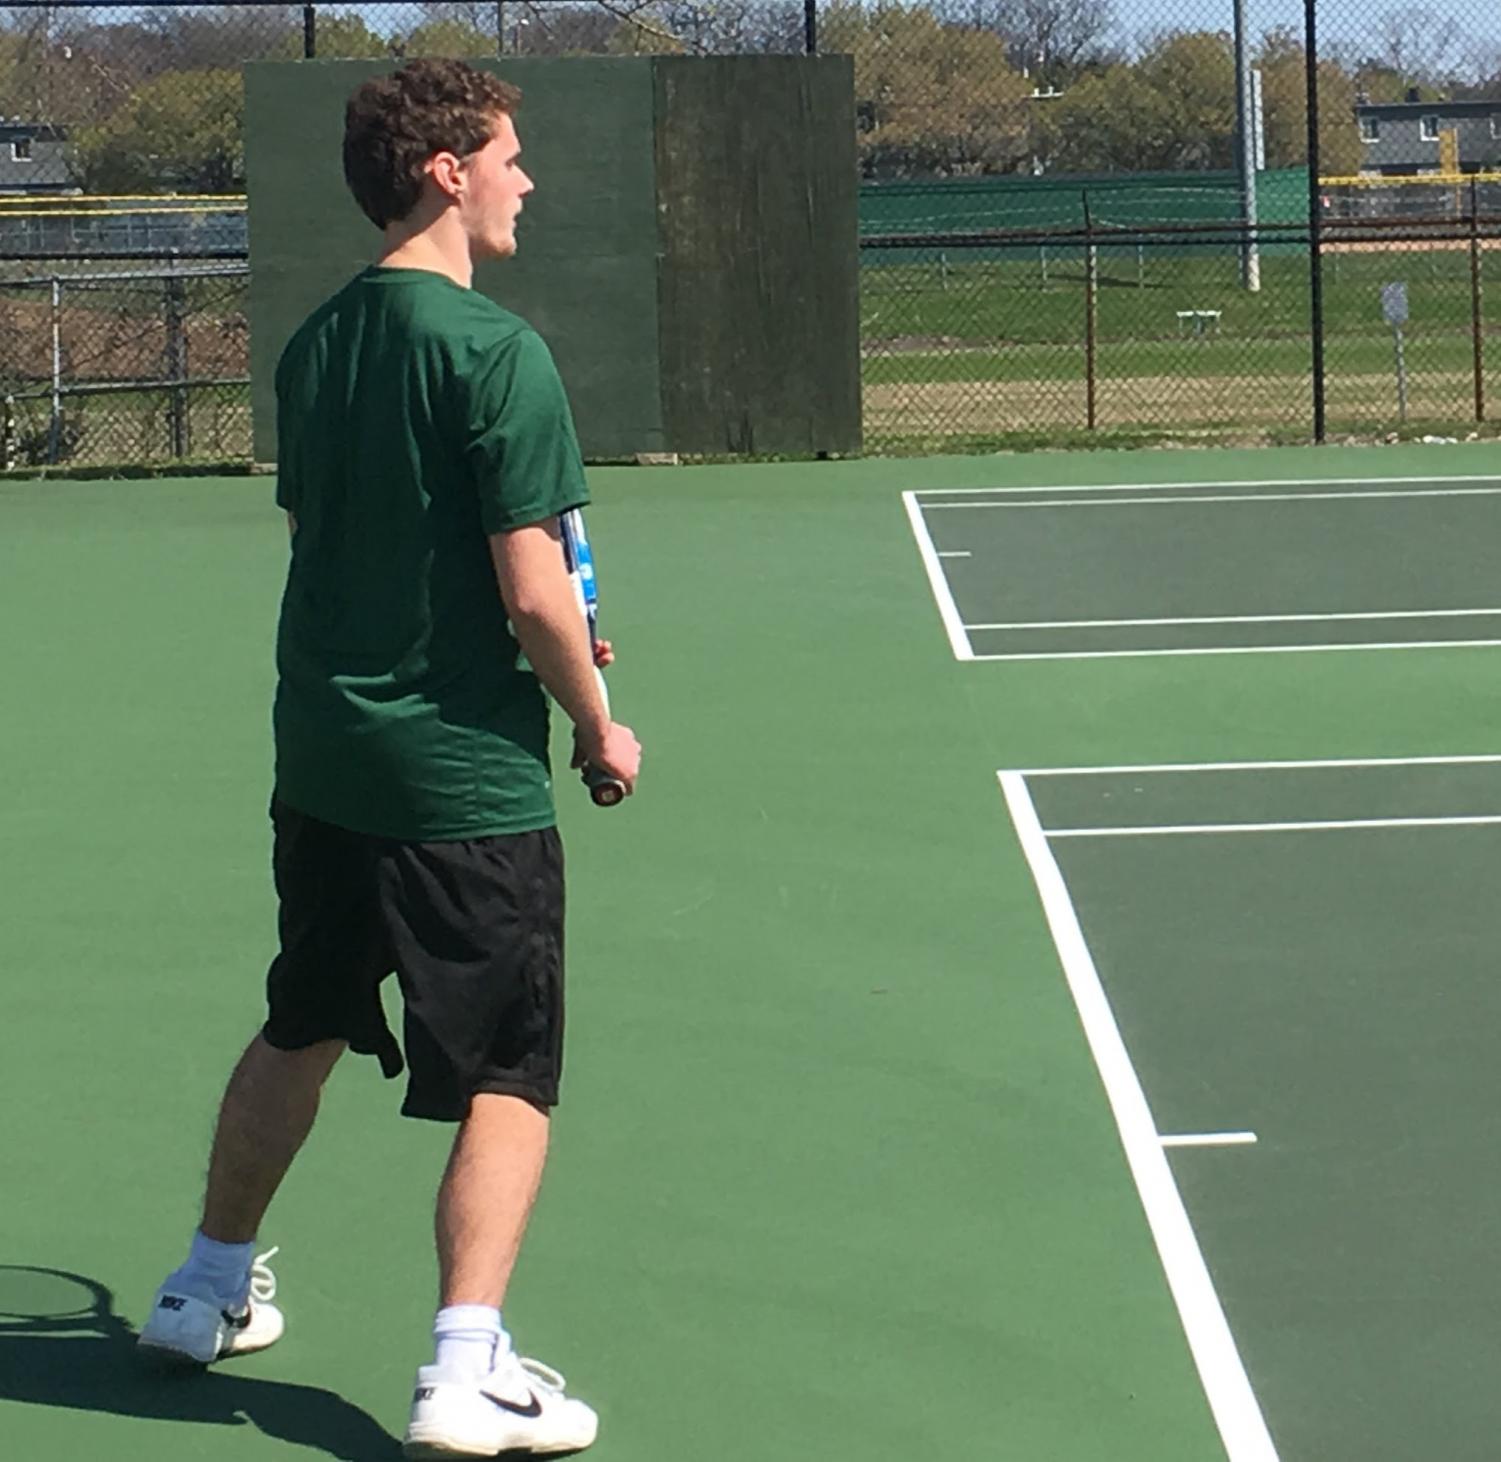 Burros+Tennis+Season+with+strong+sets+and+2-0+District+play